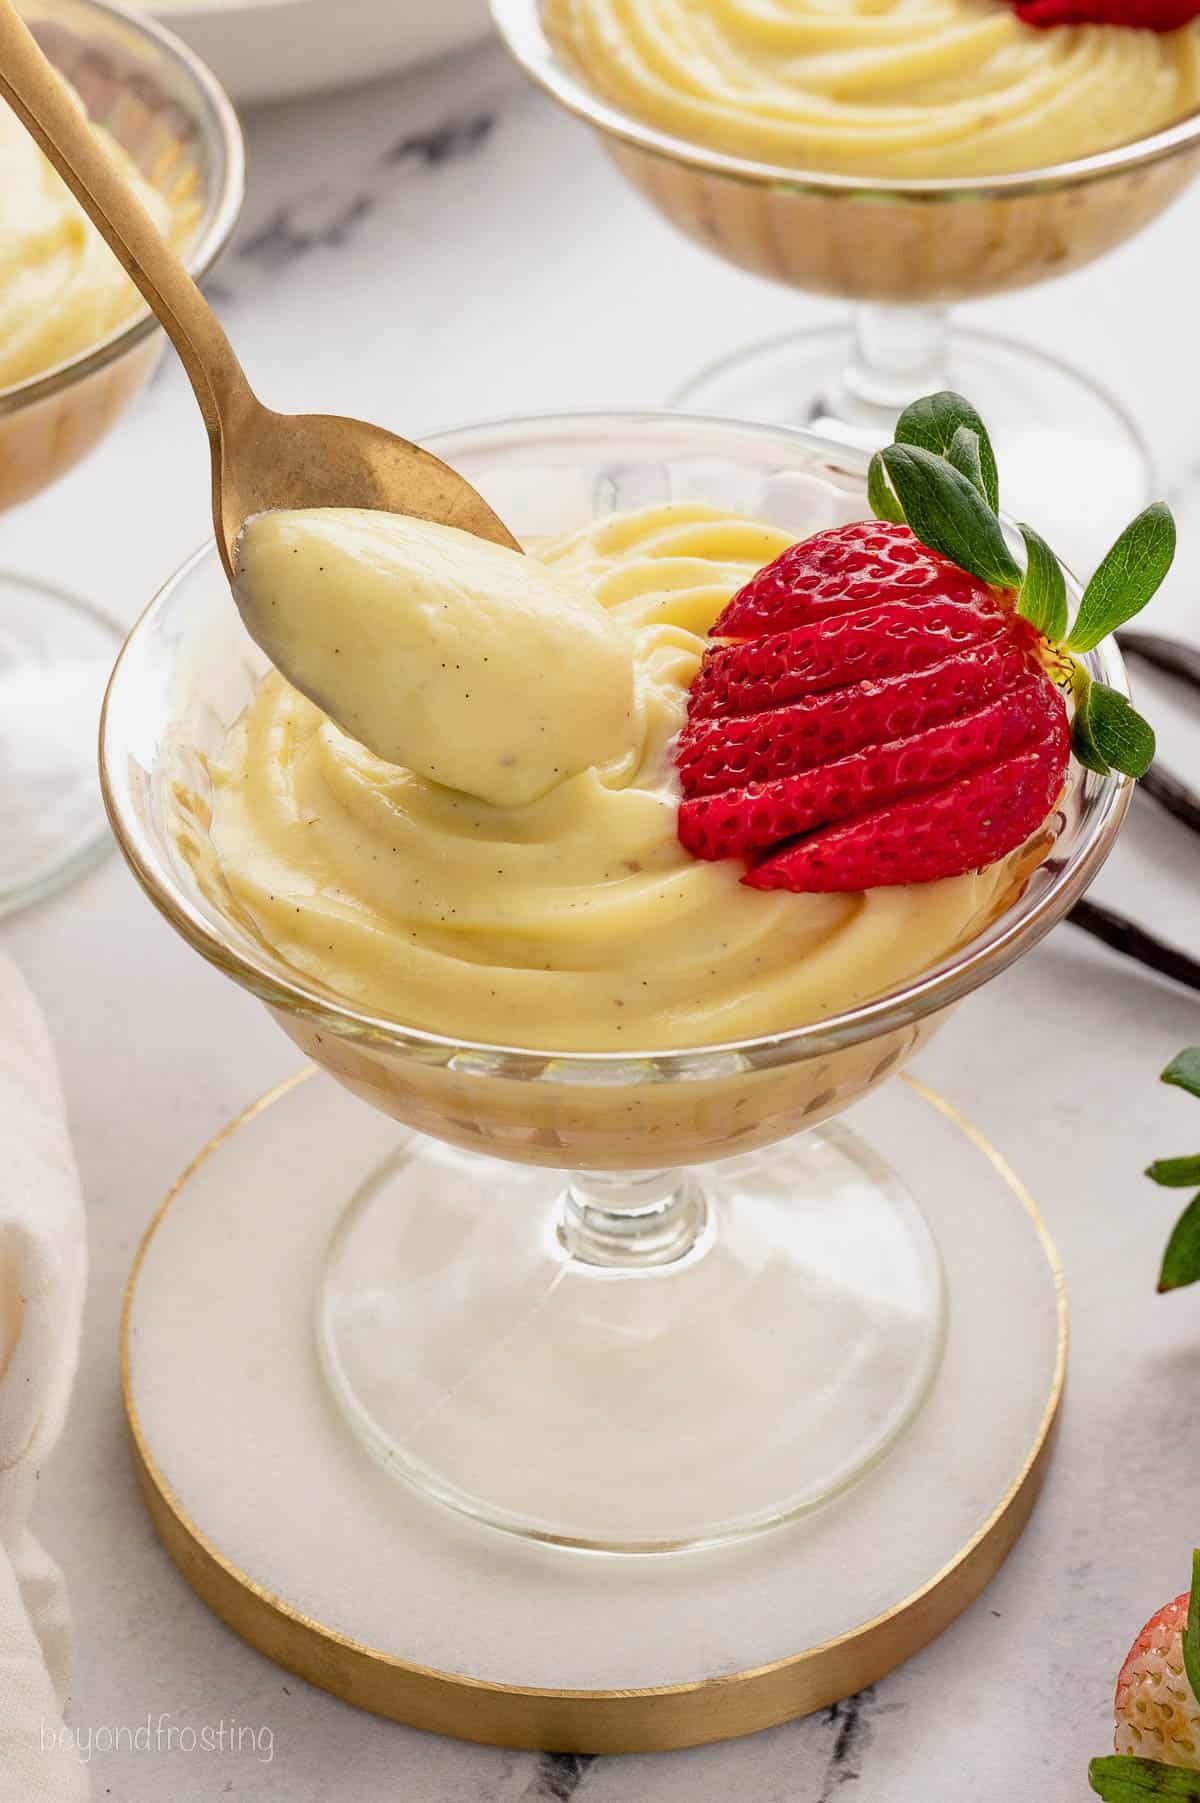 A spoon dipped into pastry cream in a coup glass, garnished with a sliced strawberry.